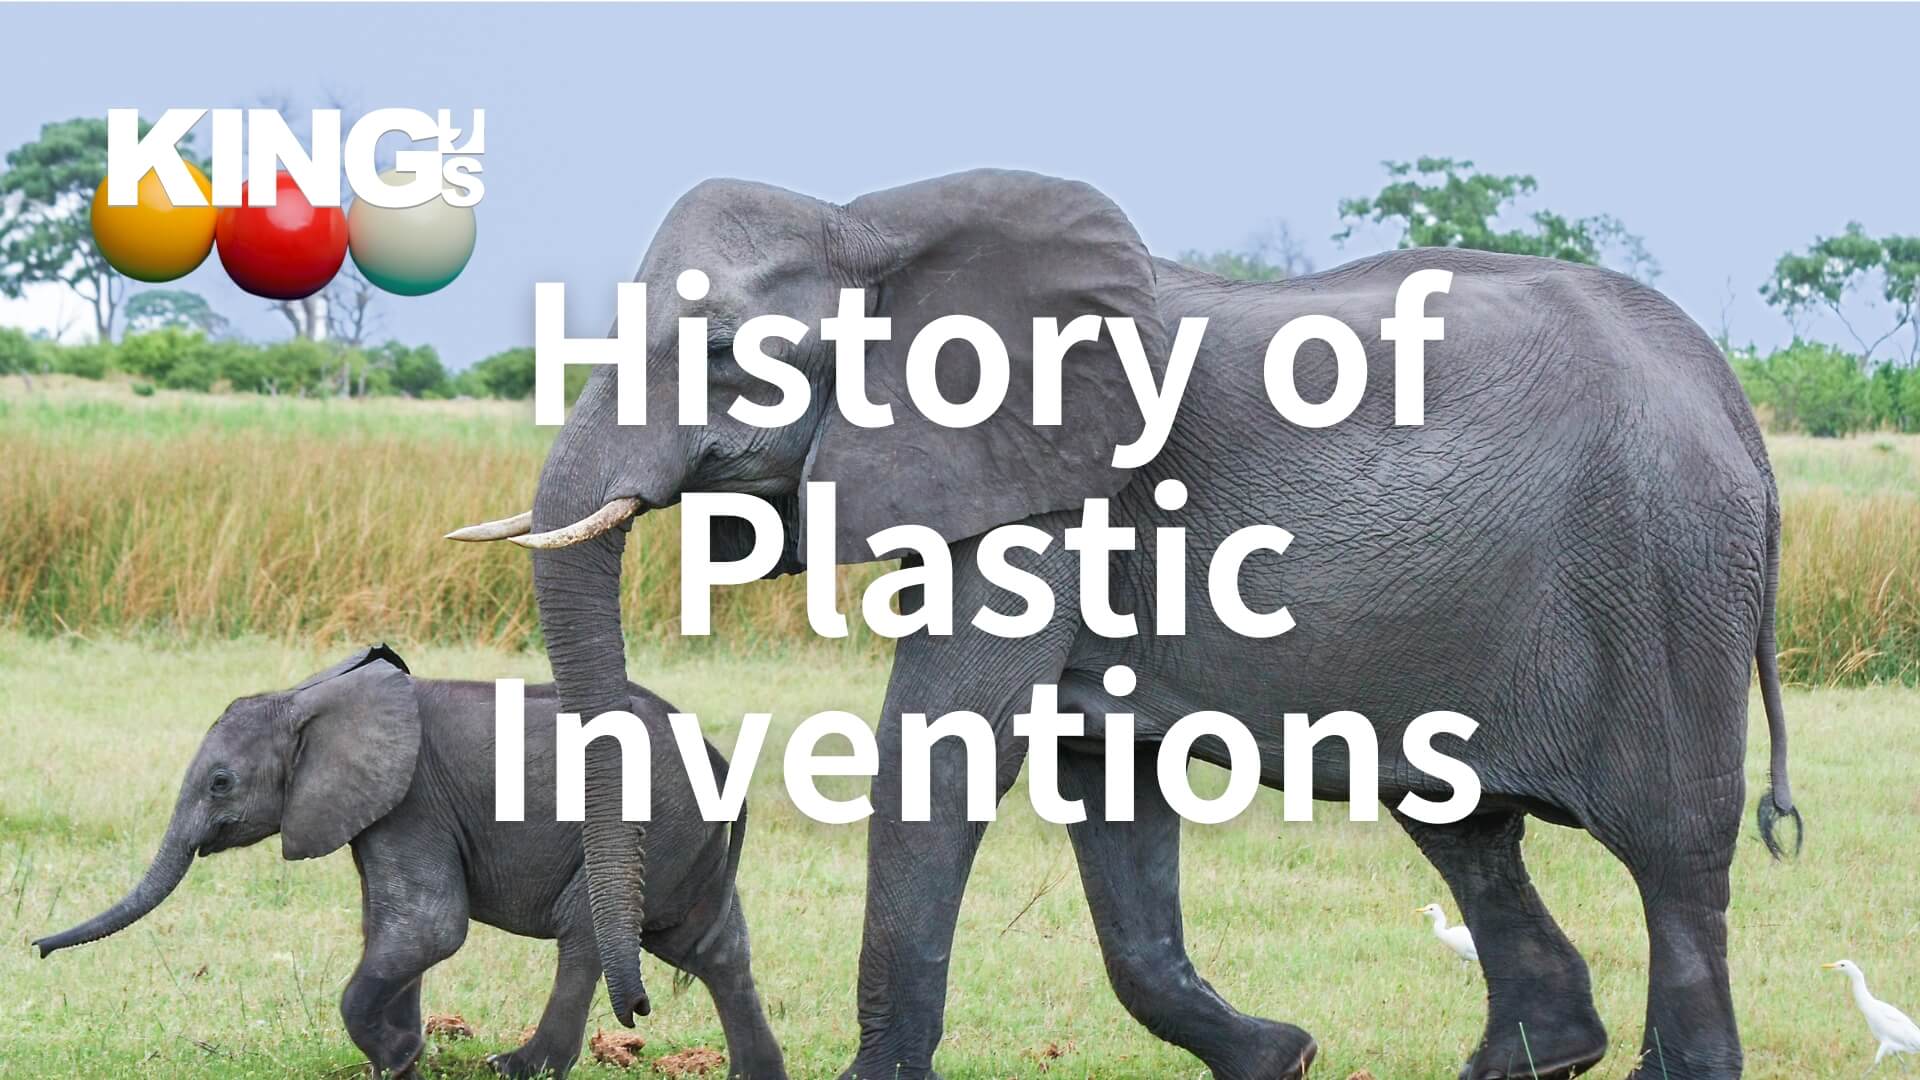 Plastic Saved Elephants: From Celluloid to Injection Molding